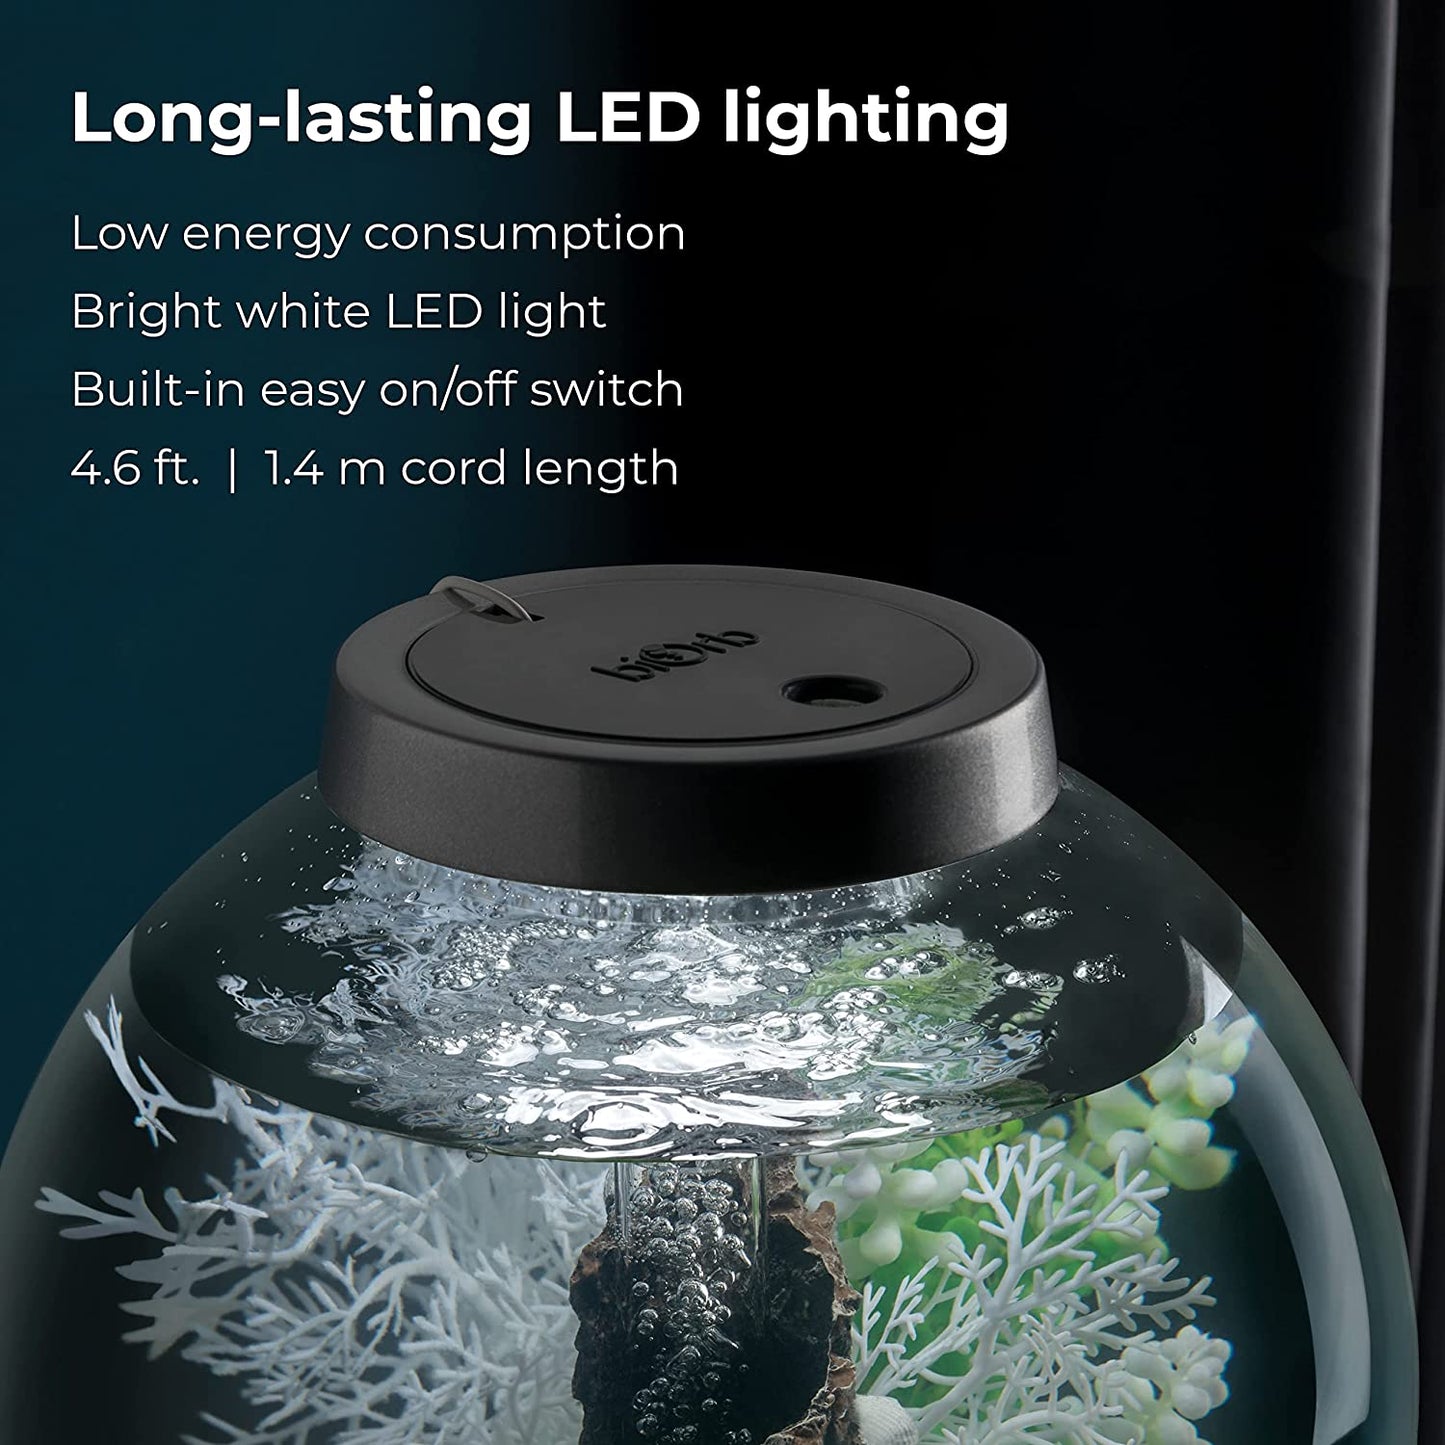 A half view of a biOrd aquarium. There is text which reads, "Long lasting LED lighting."